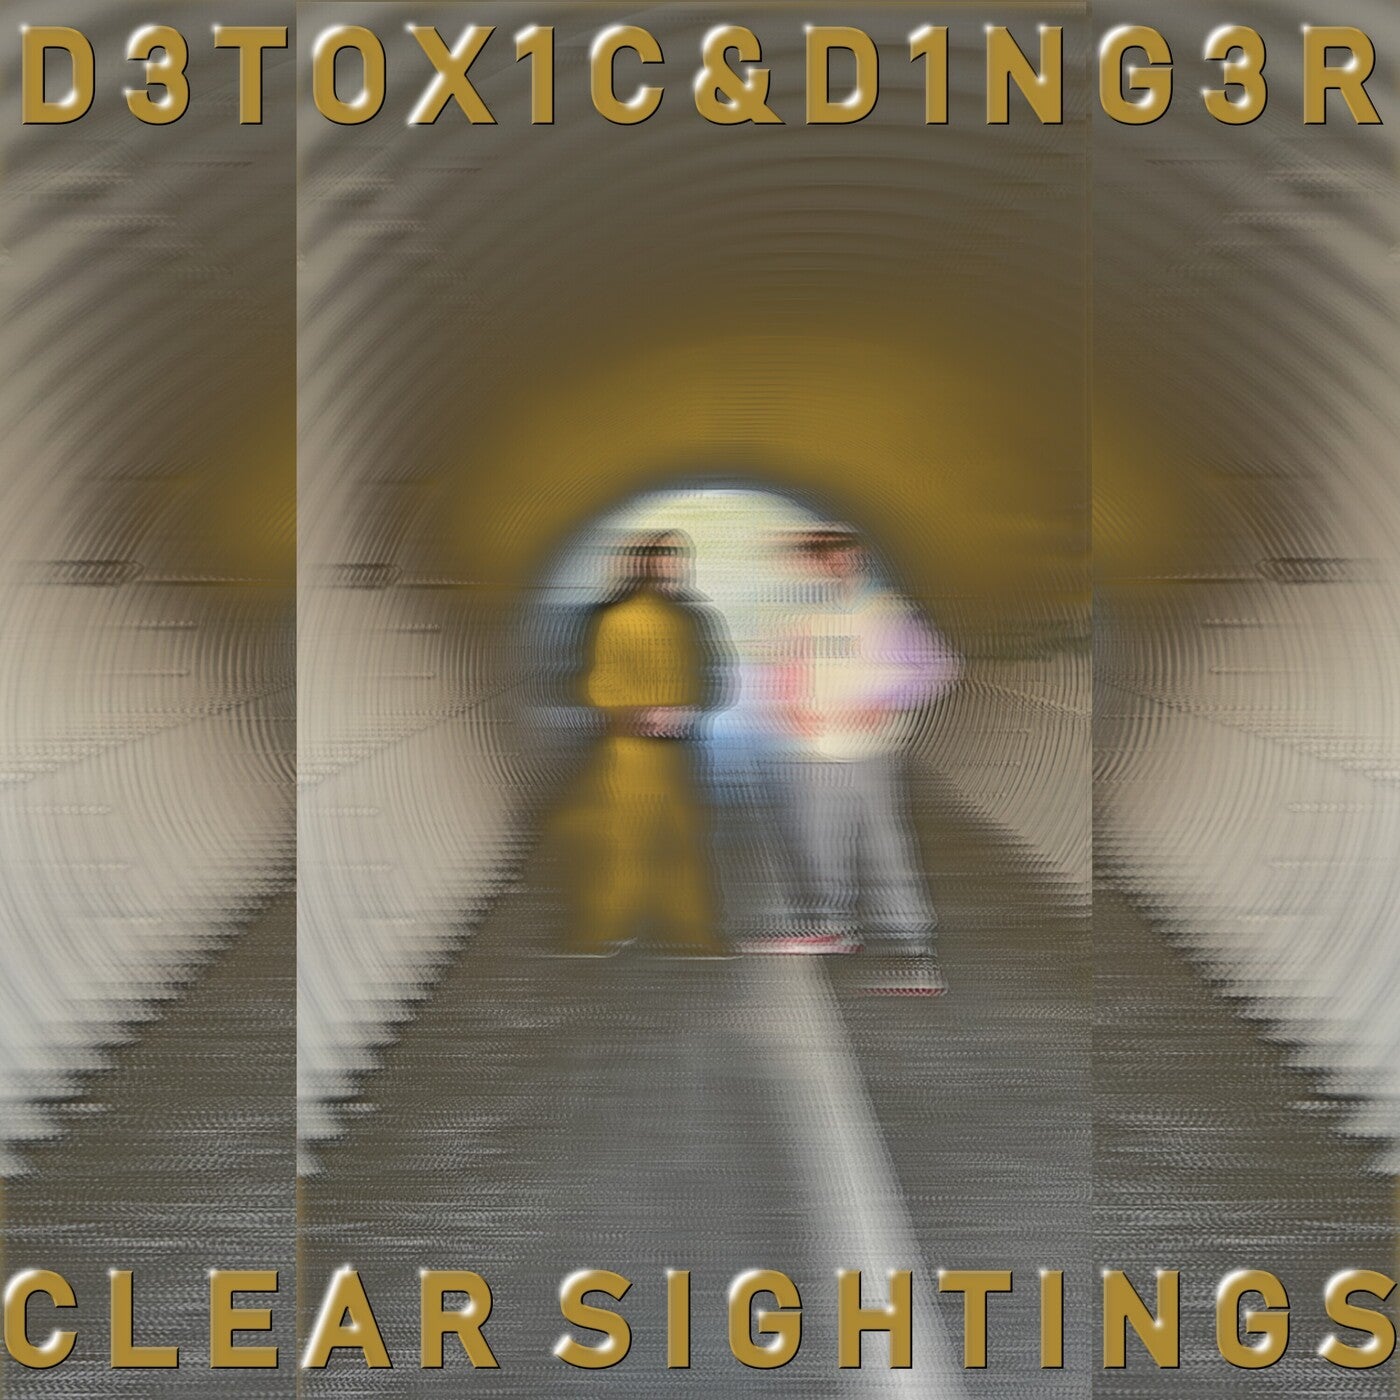 Clear Sightings